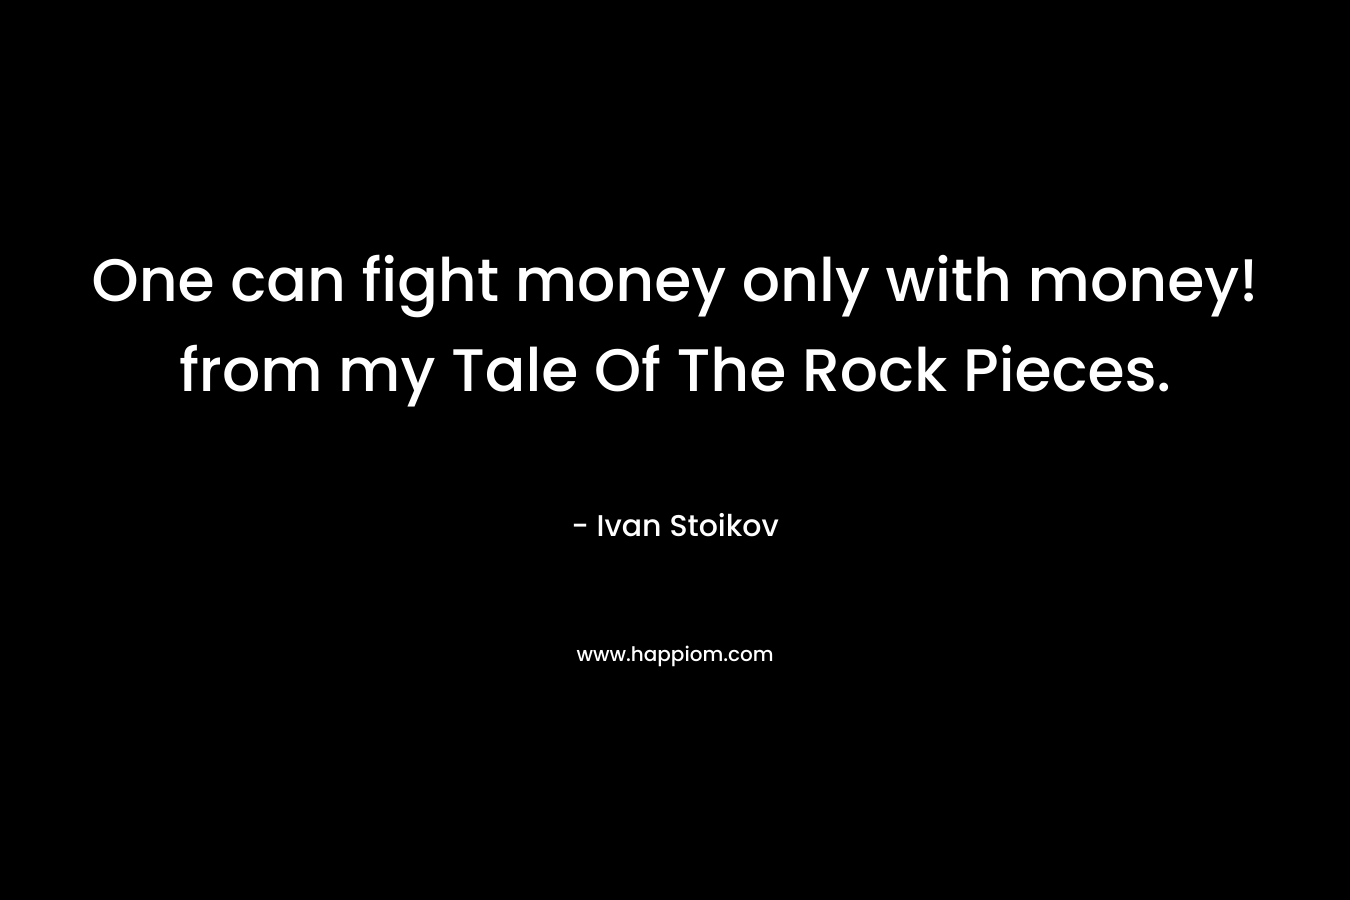 One can fight money only with money! from my Tale Of The Rock Pieces.